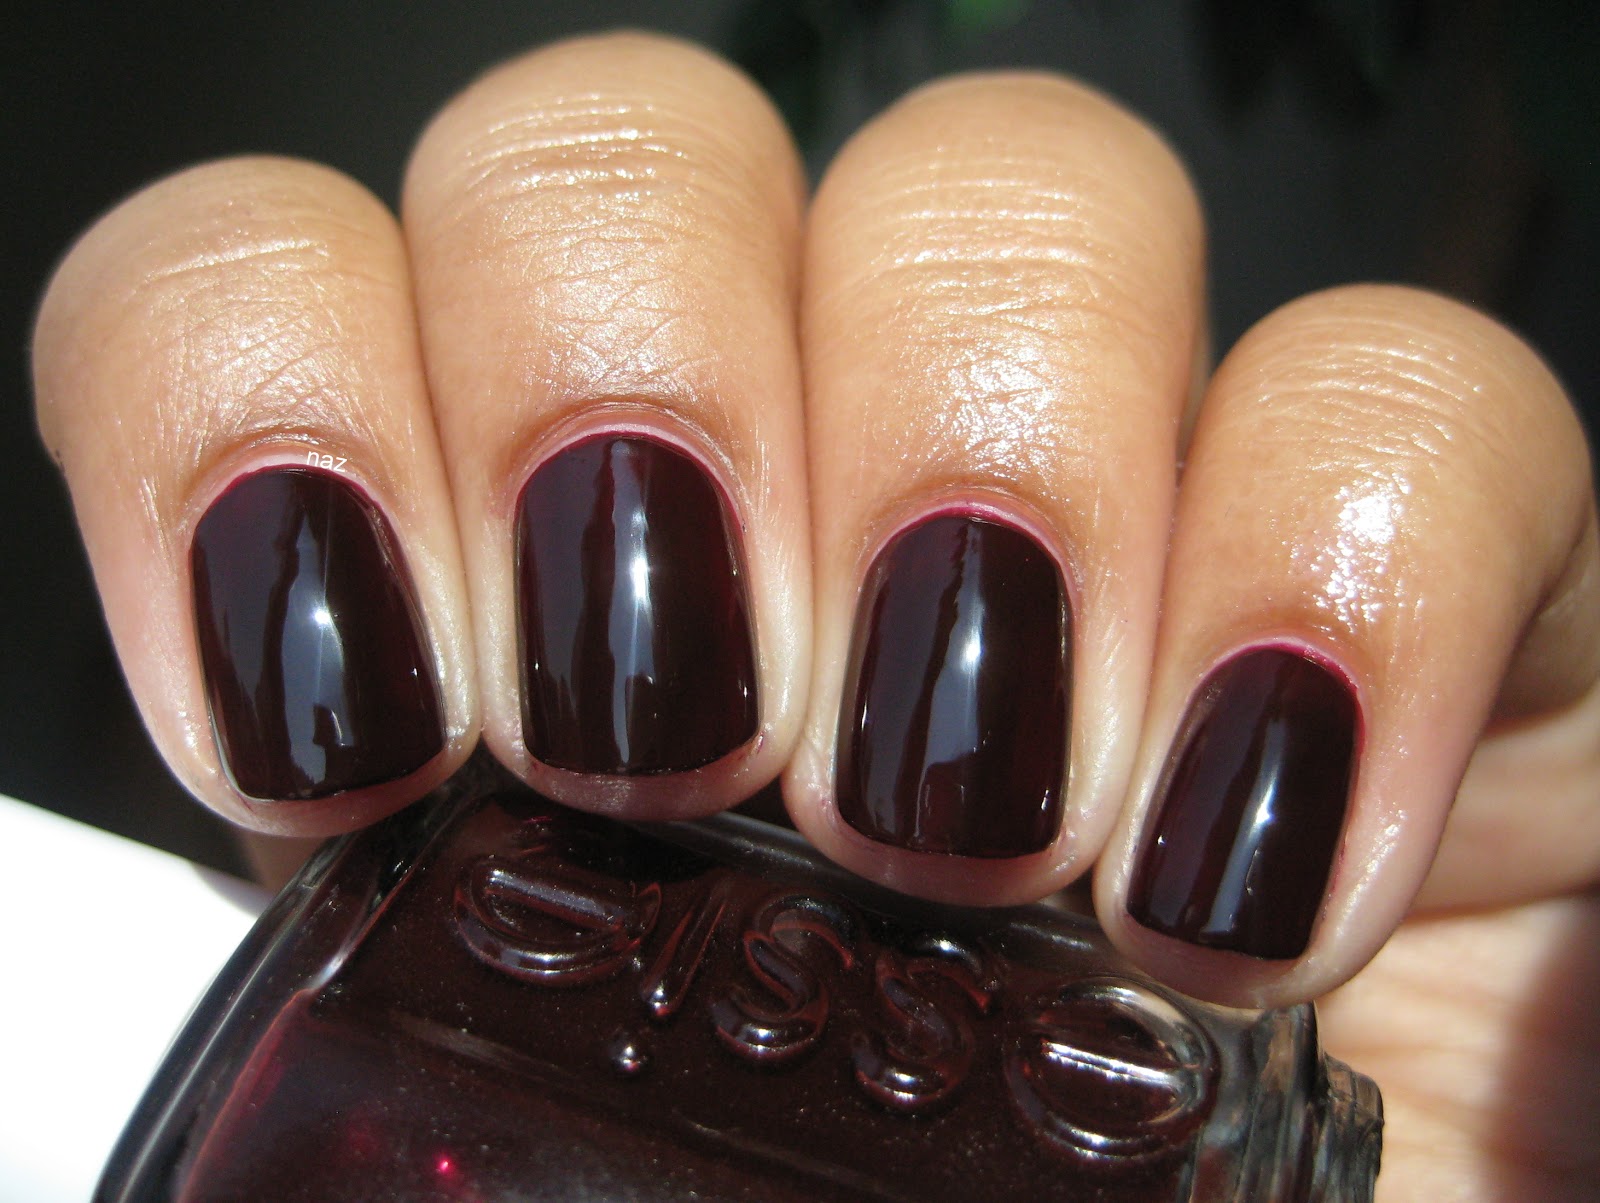 2. Essie Nail Polish in "Wicked" - wide 7